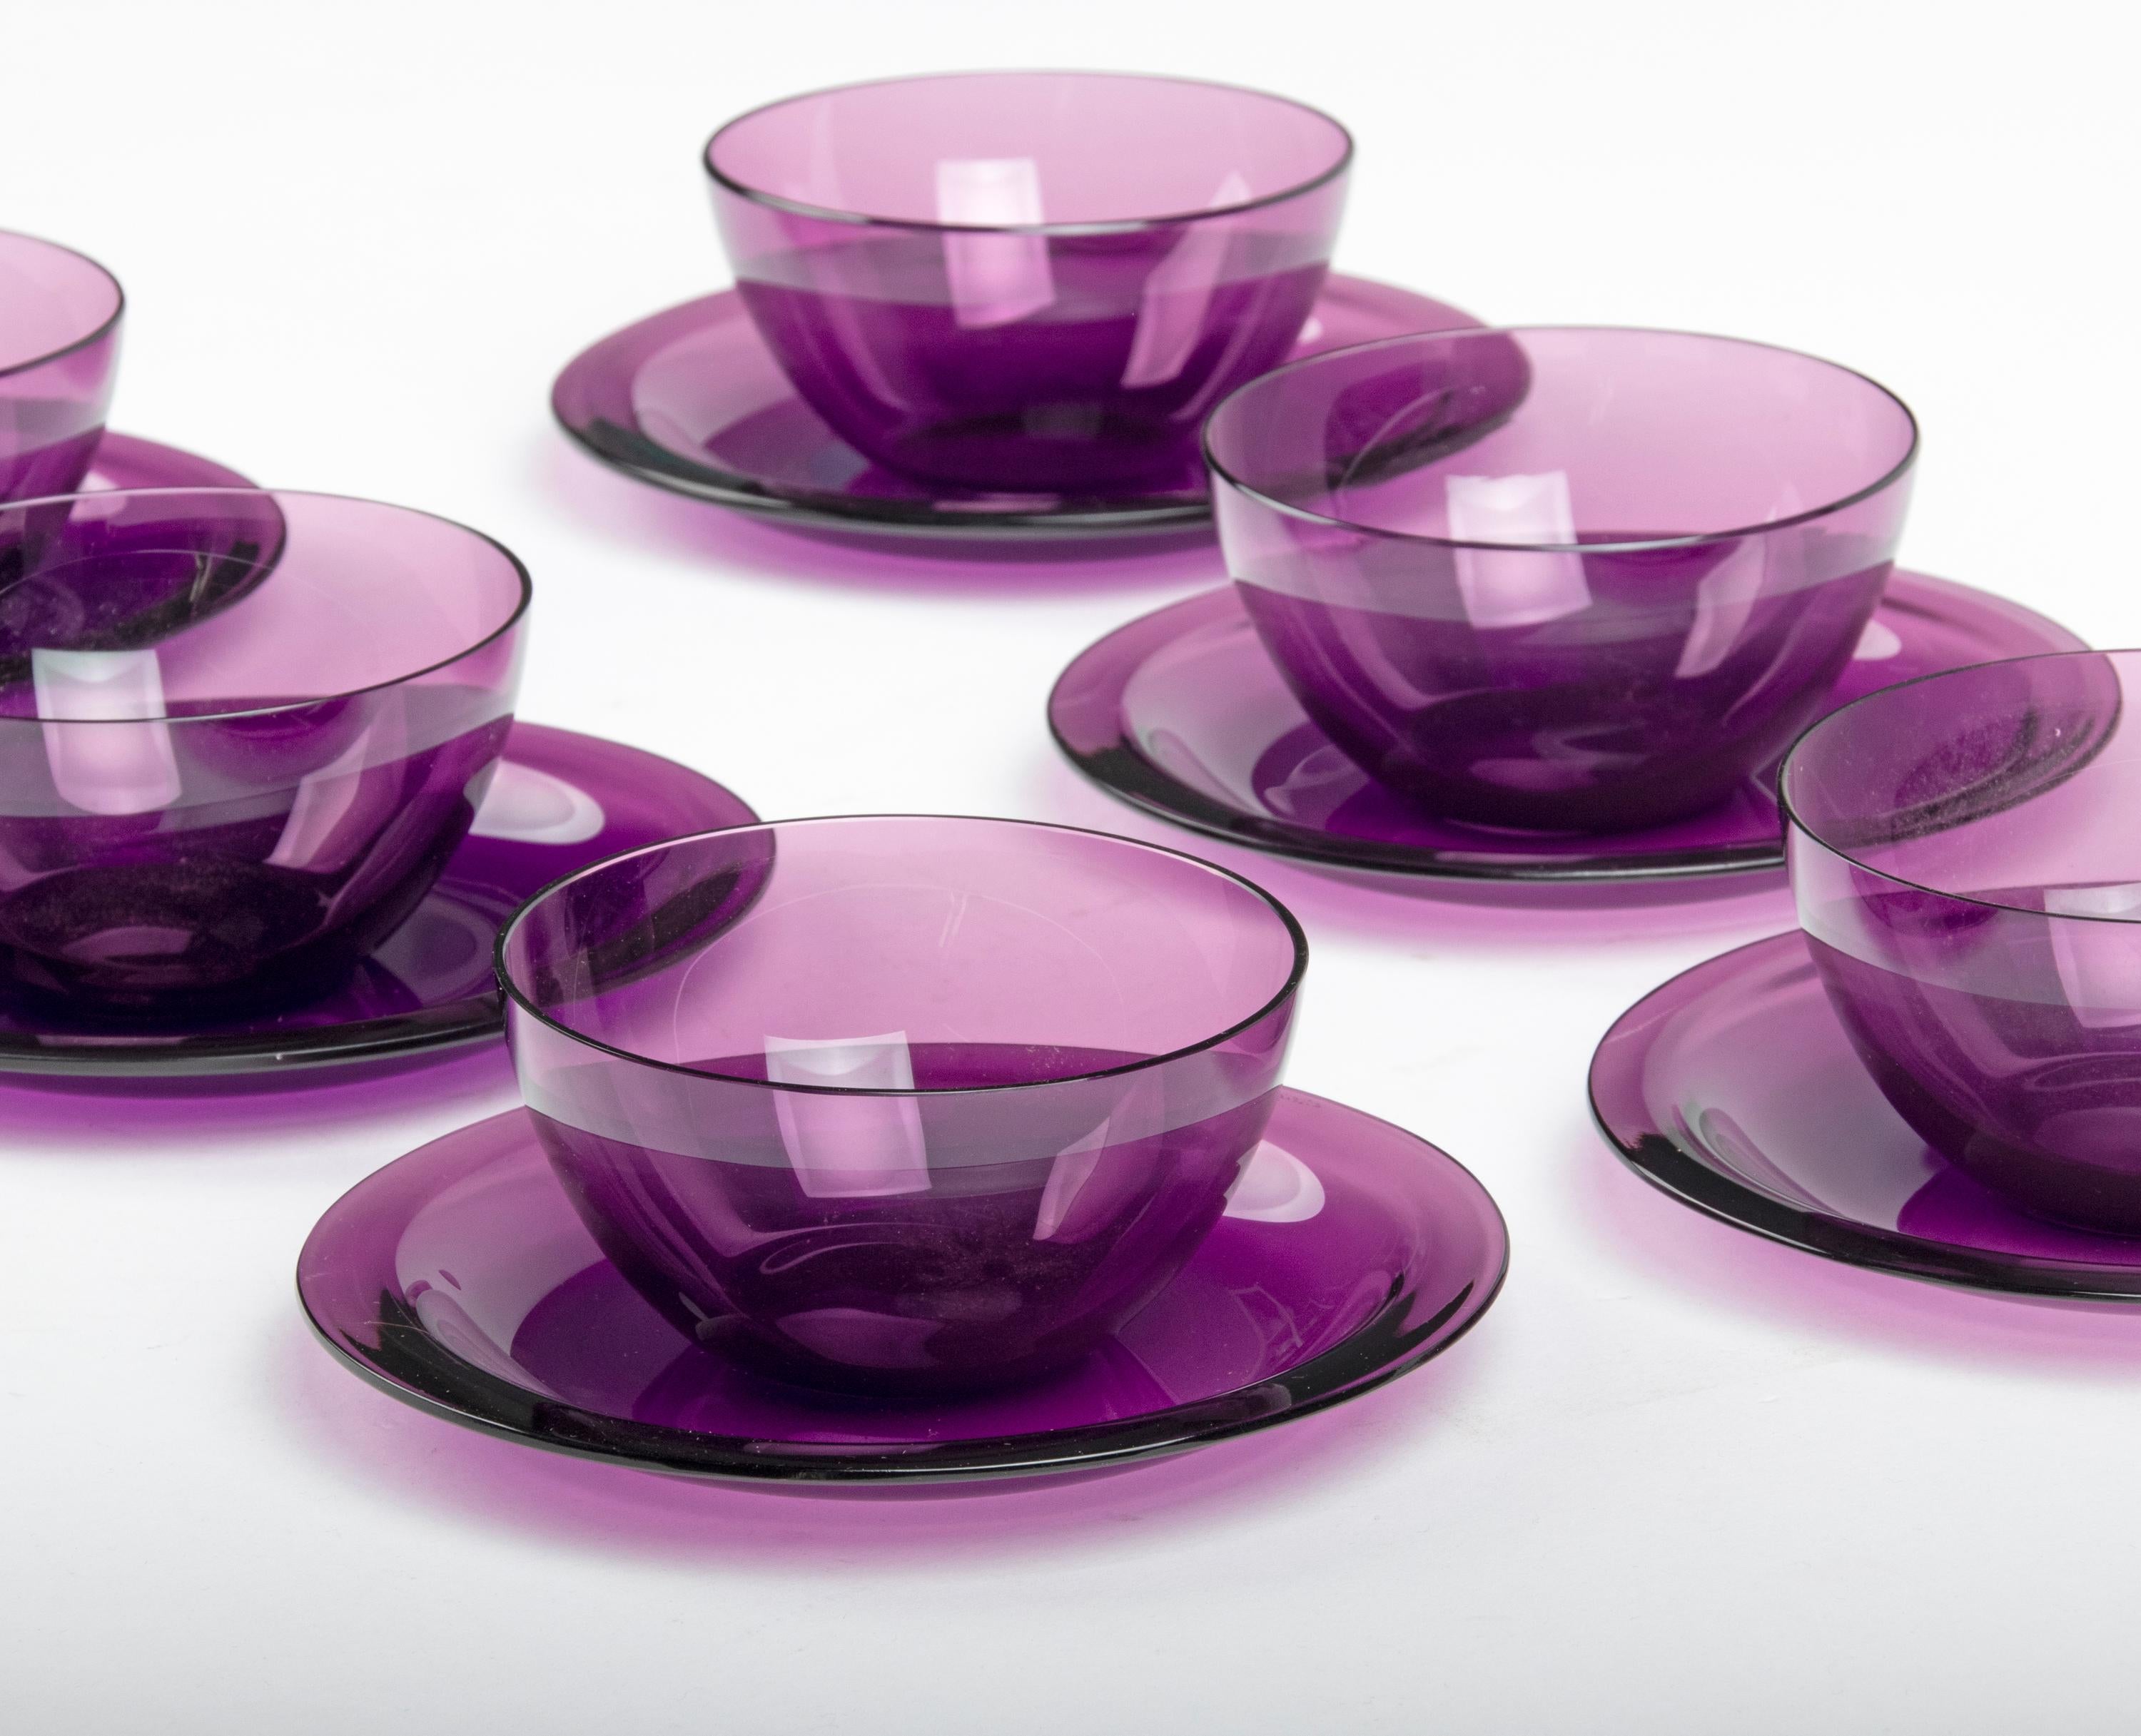 Set of 6 Crystal Fruitbowls with Saucers by Lalique France 1